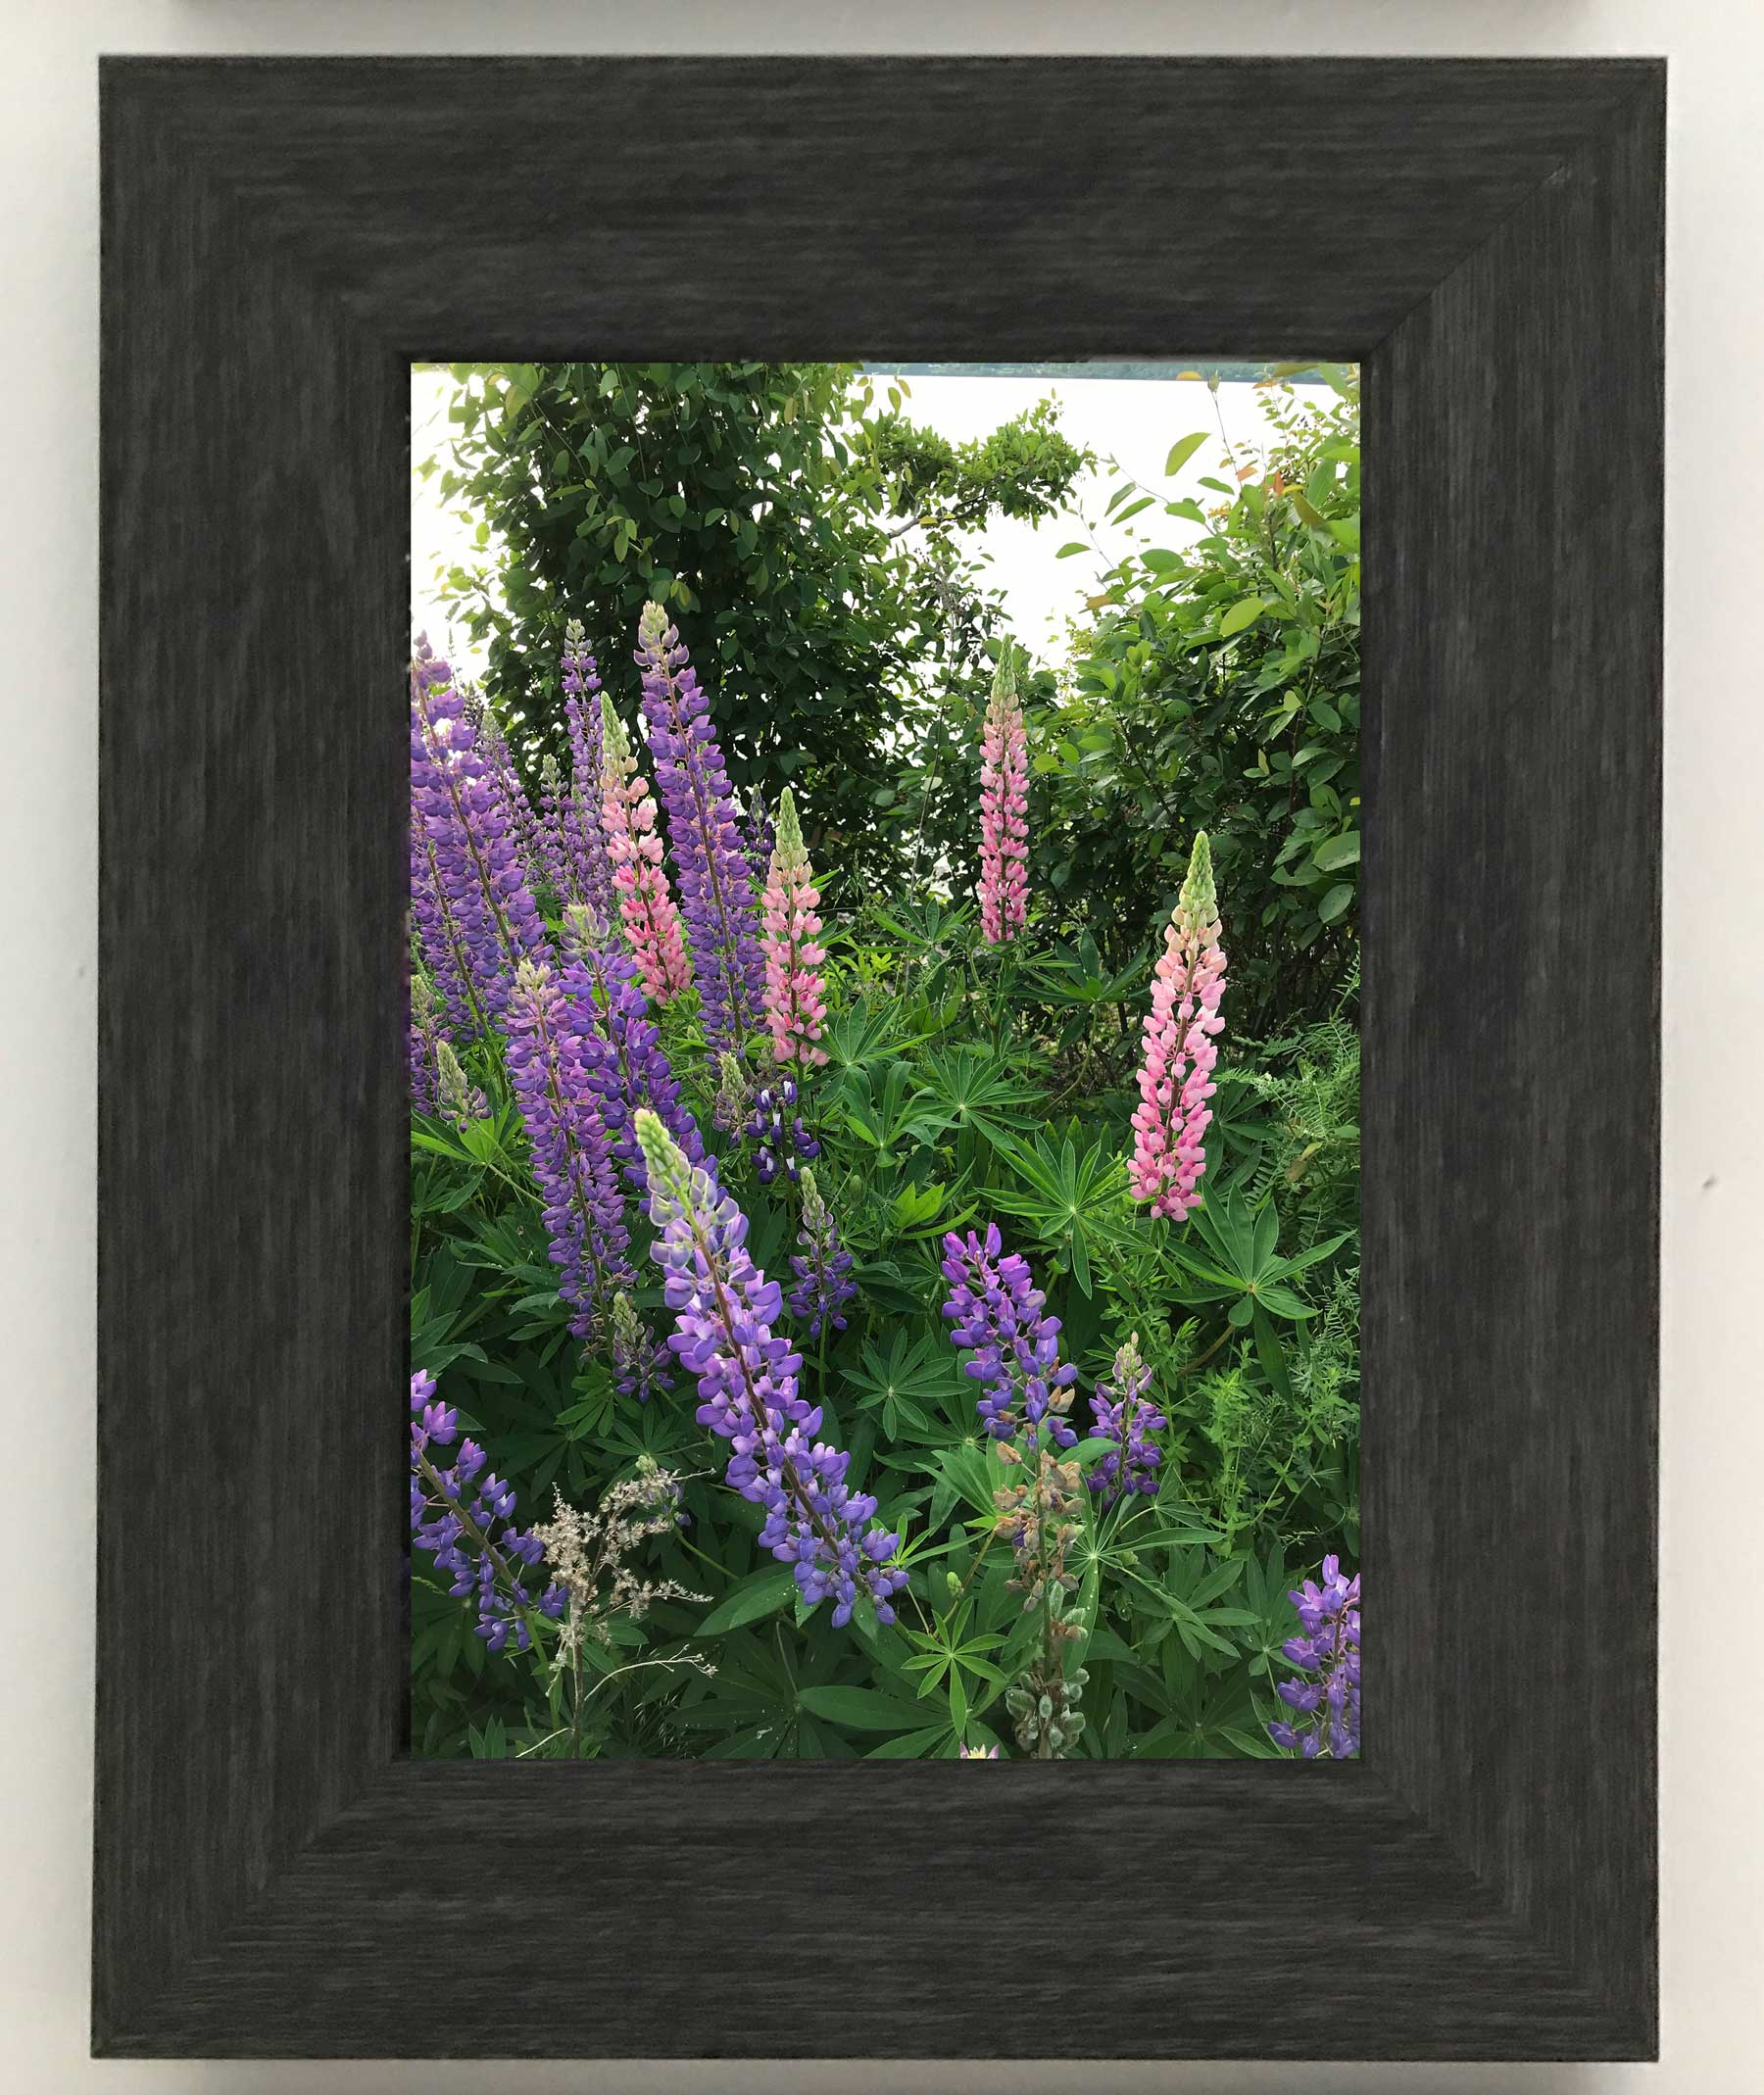 Lupins, The most beautiful pink and purple wildflowers 6.5 x 4.5 inches in a charcoal frame 9.25 x 7.25 inches with a glass. Ready to hang.